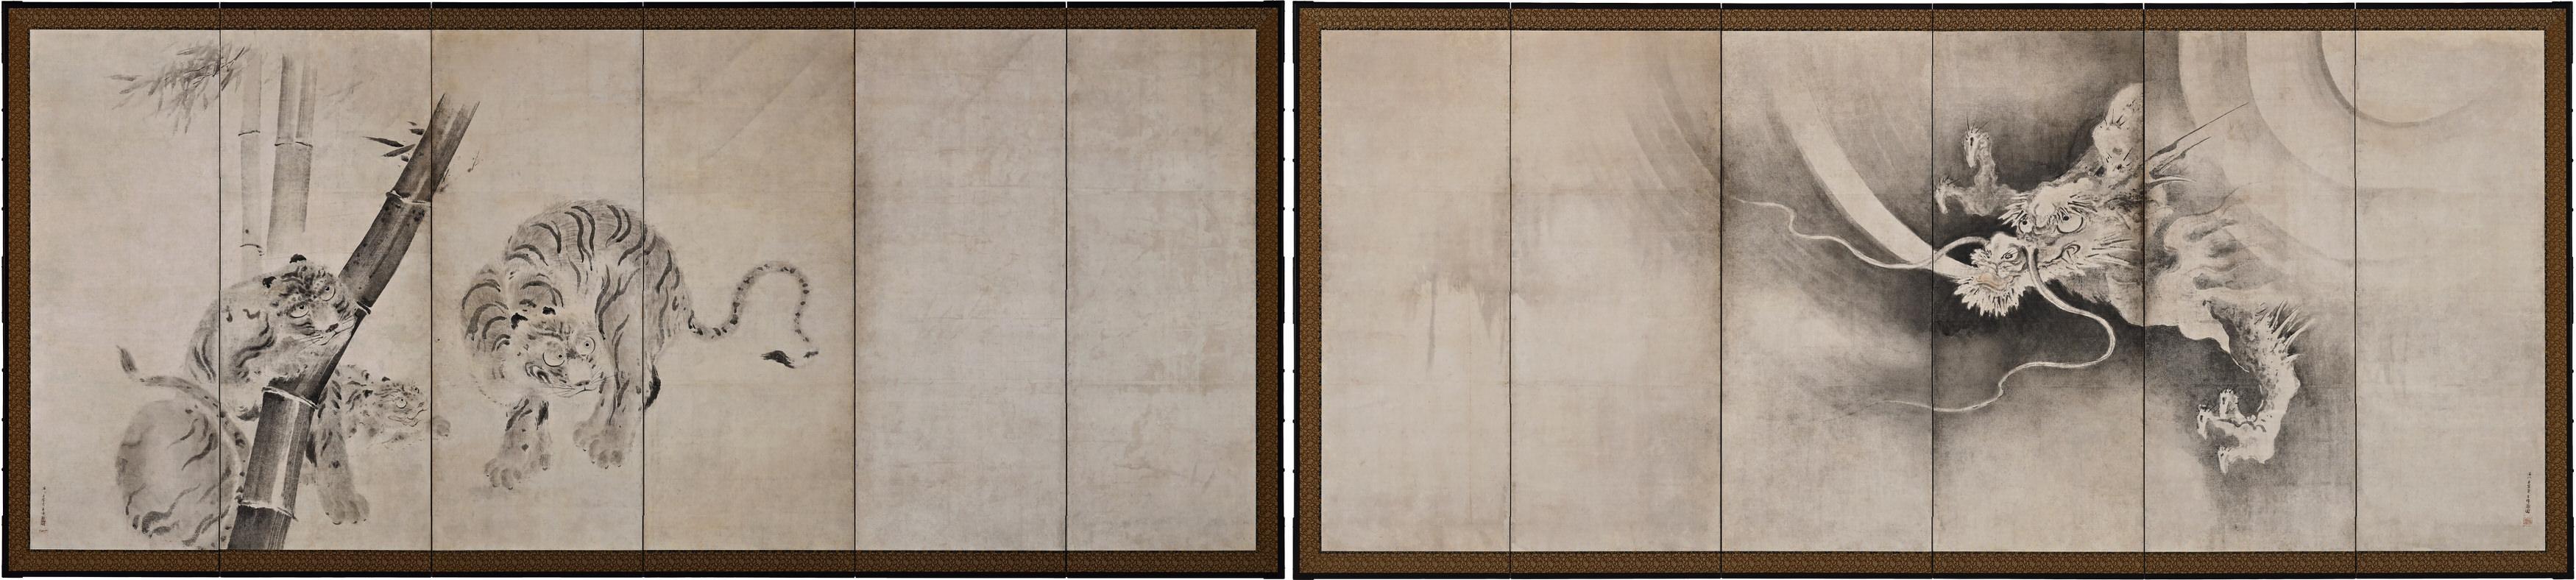 Kaiho Yusetsu (1598-1677)

Tiger and Dragon

Early Edo Period, Circa 1650

A Pair of Six-fold Japanese Screens. Ink and slight color on paper.

Dimensions:

Each screen: H. 171 cm x W. 380 cm (67.5’’ x 149.5’’)

In this pair of early Edo